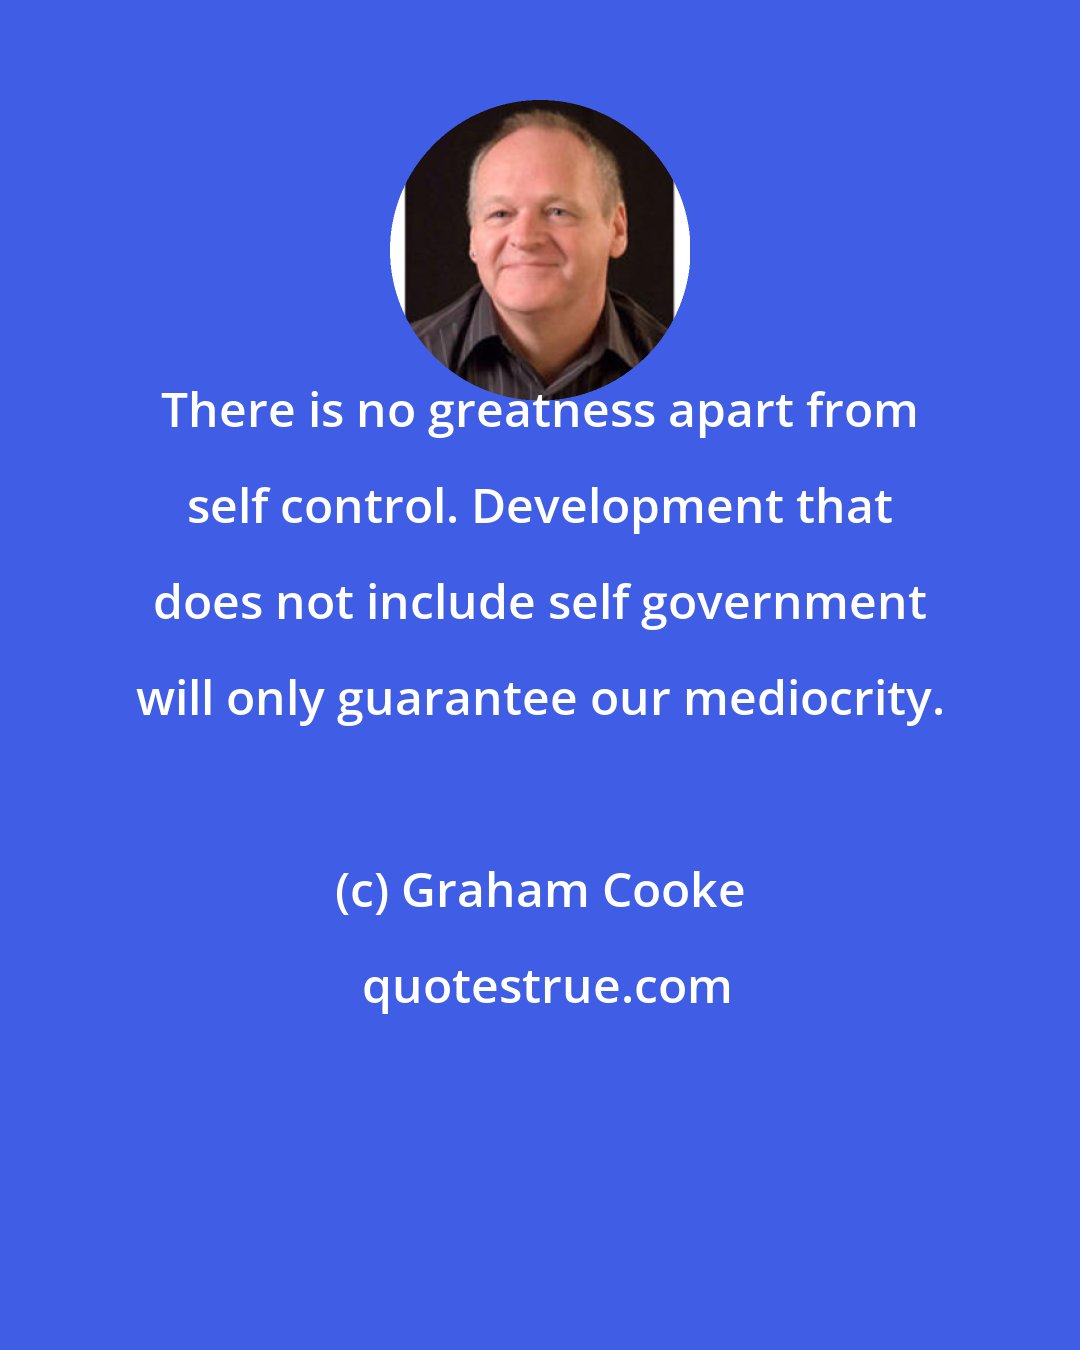 Graham Cooke: There is no greatness apart from self control. Development that does not include self government will only guarantee our mediocrity.